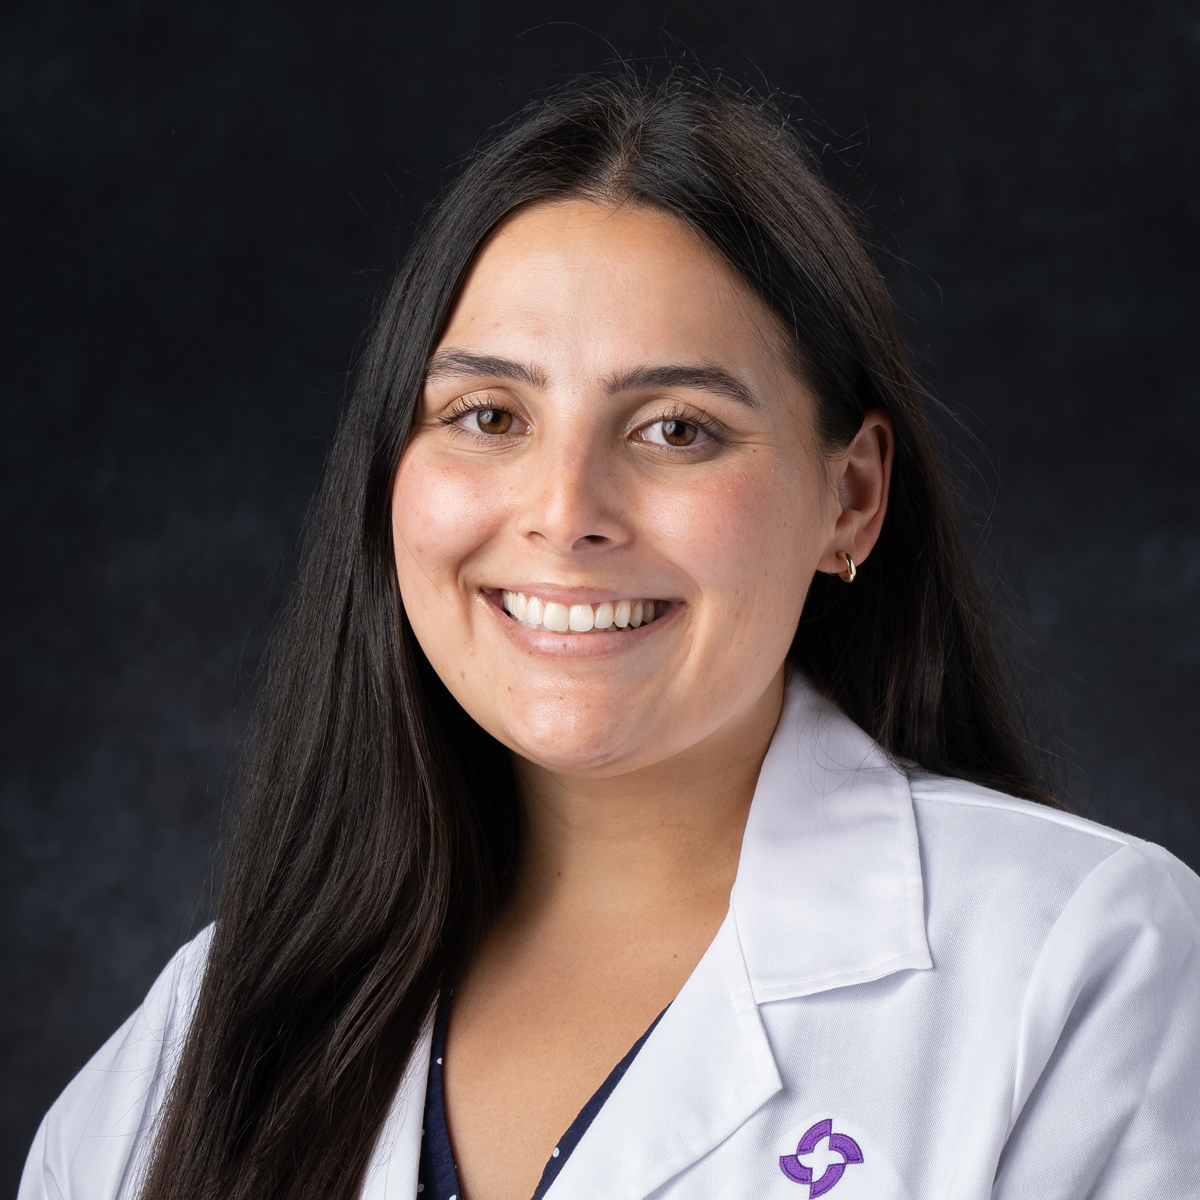 Headshot of Dr. Lall